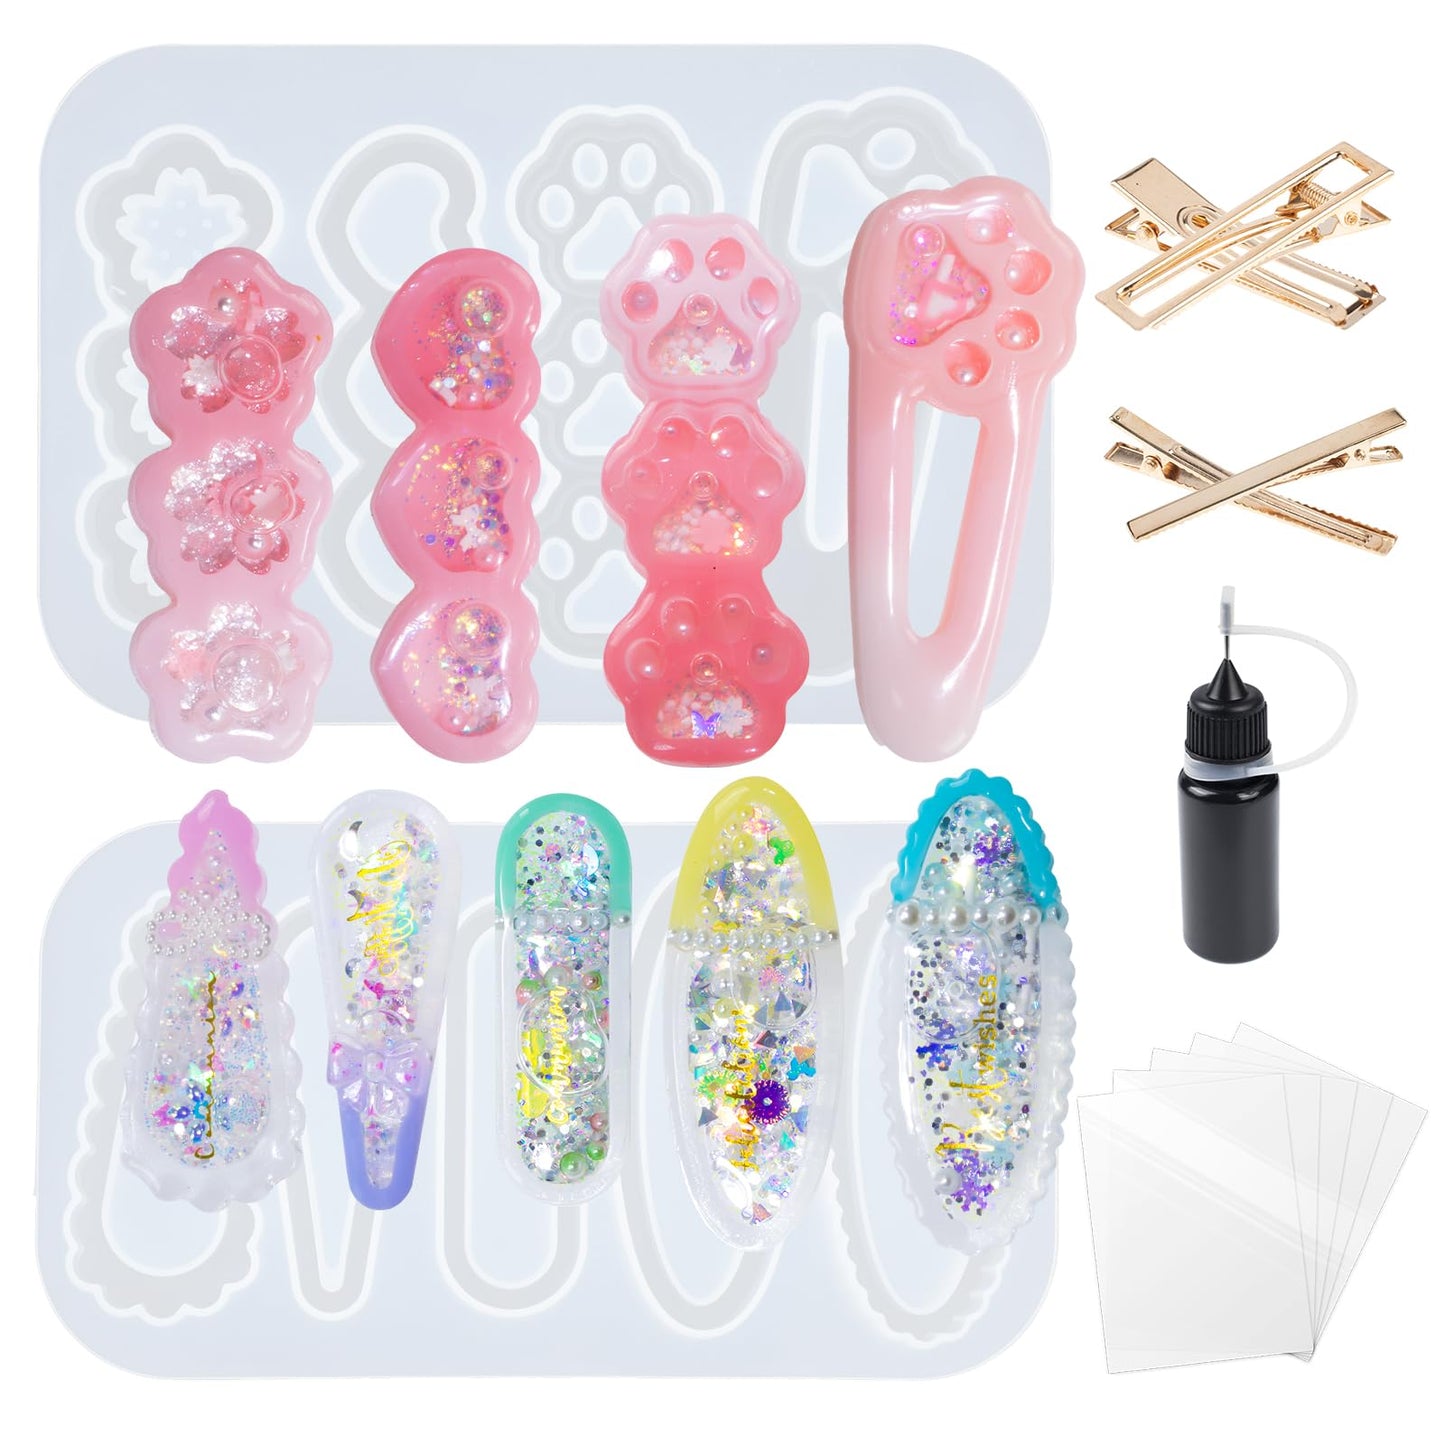 Hair Clips Resin Shaker Molds Set Barrette Pack of 12 Epoxy Silicone Trays Precision Tip Applicator Bottle Kit Bundle